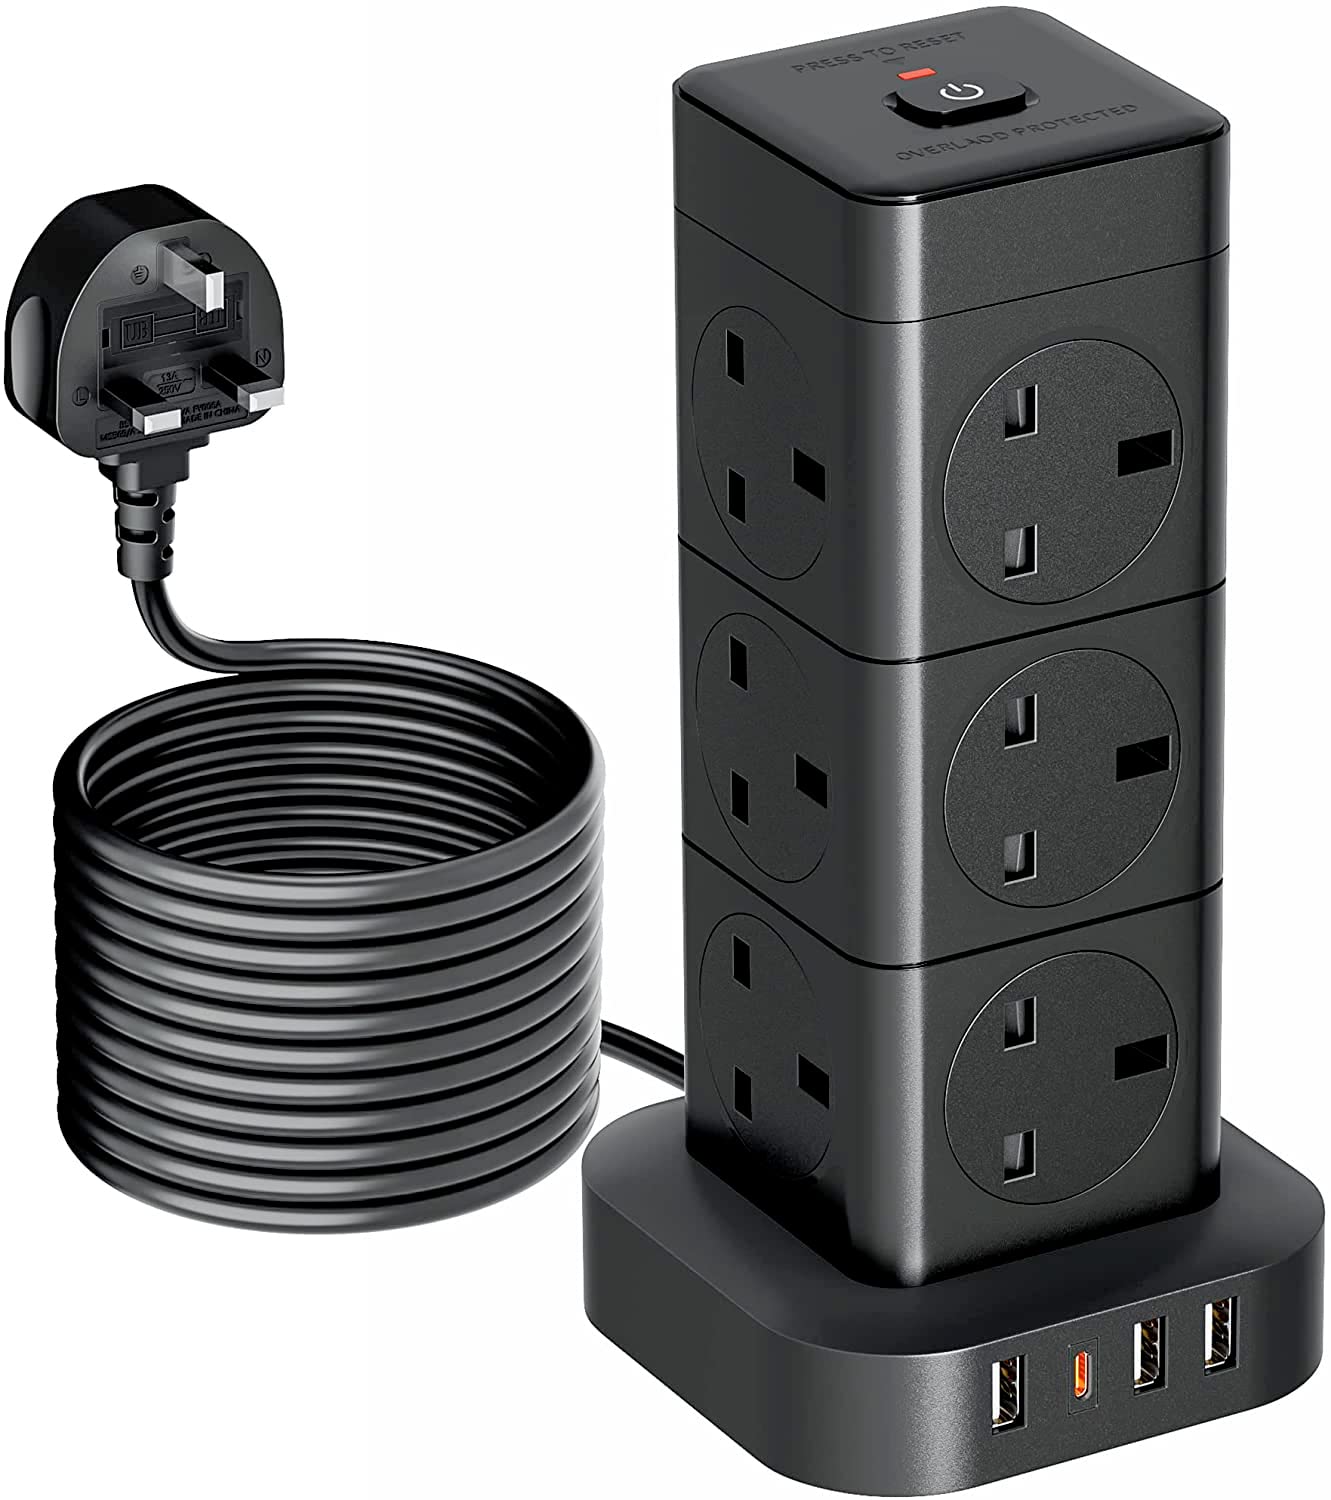 Hulker 5M Tower Extension Lead with USB, Vertical Power Strip 12 Way 4 USB Slots (1 Type C and 3 USB Ports) Multi Plug Extension Socket with Overload Protection 3250W 13A 5 Meters Long Extension Cord